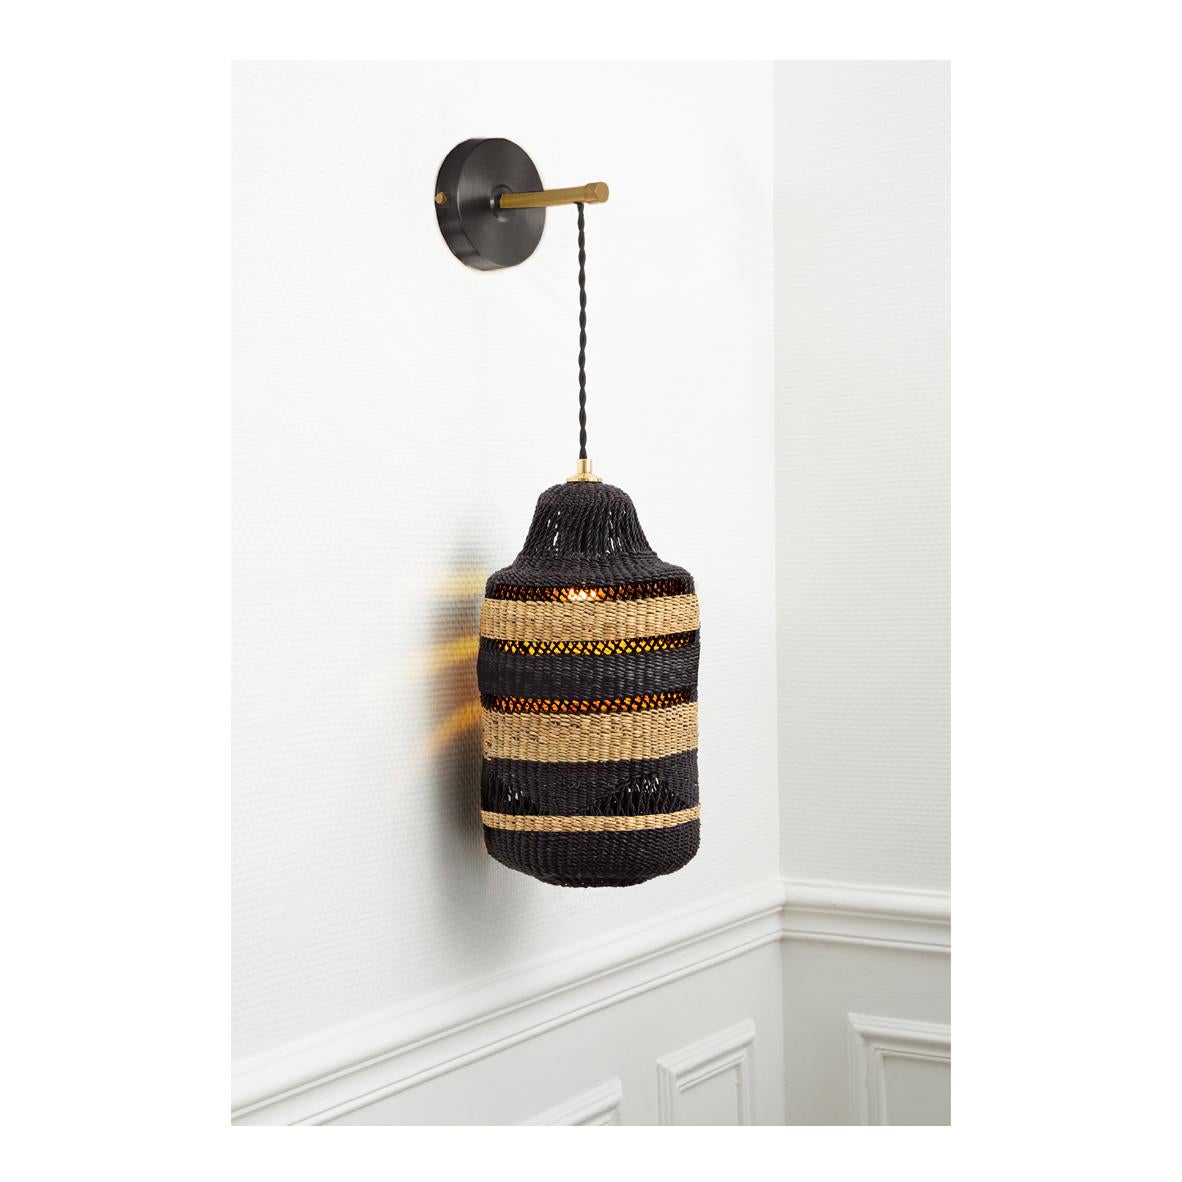 Wall lamp SHADOW : 
Intricately woven
Colour: Natural / midnight (black)

Would you like to enhance your home with natural ornaments? This pendant wall lantern can fill your room with decorative patterns and light it is woven like lace with